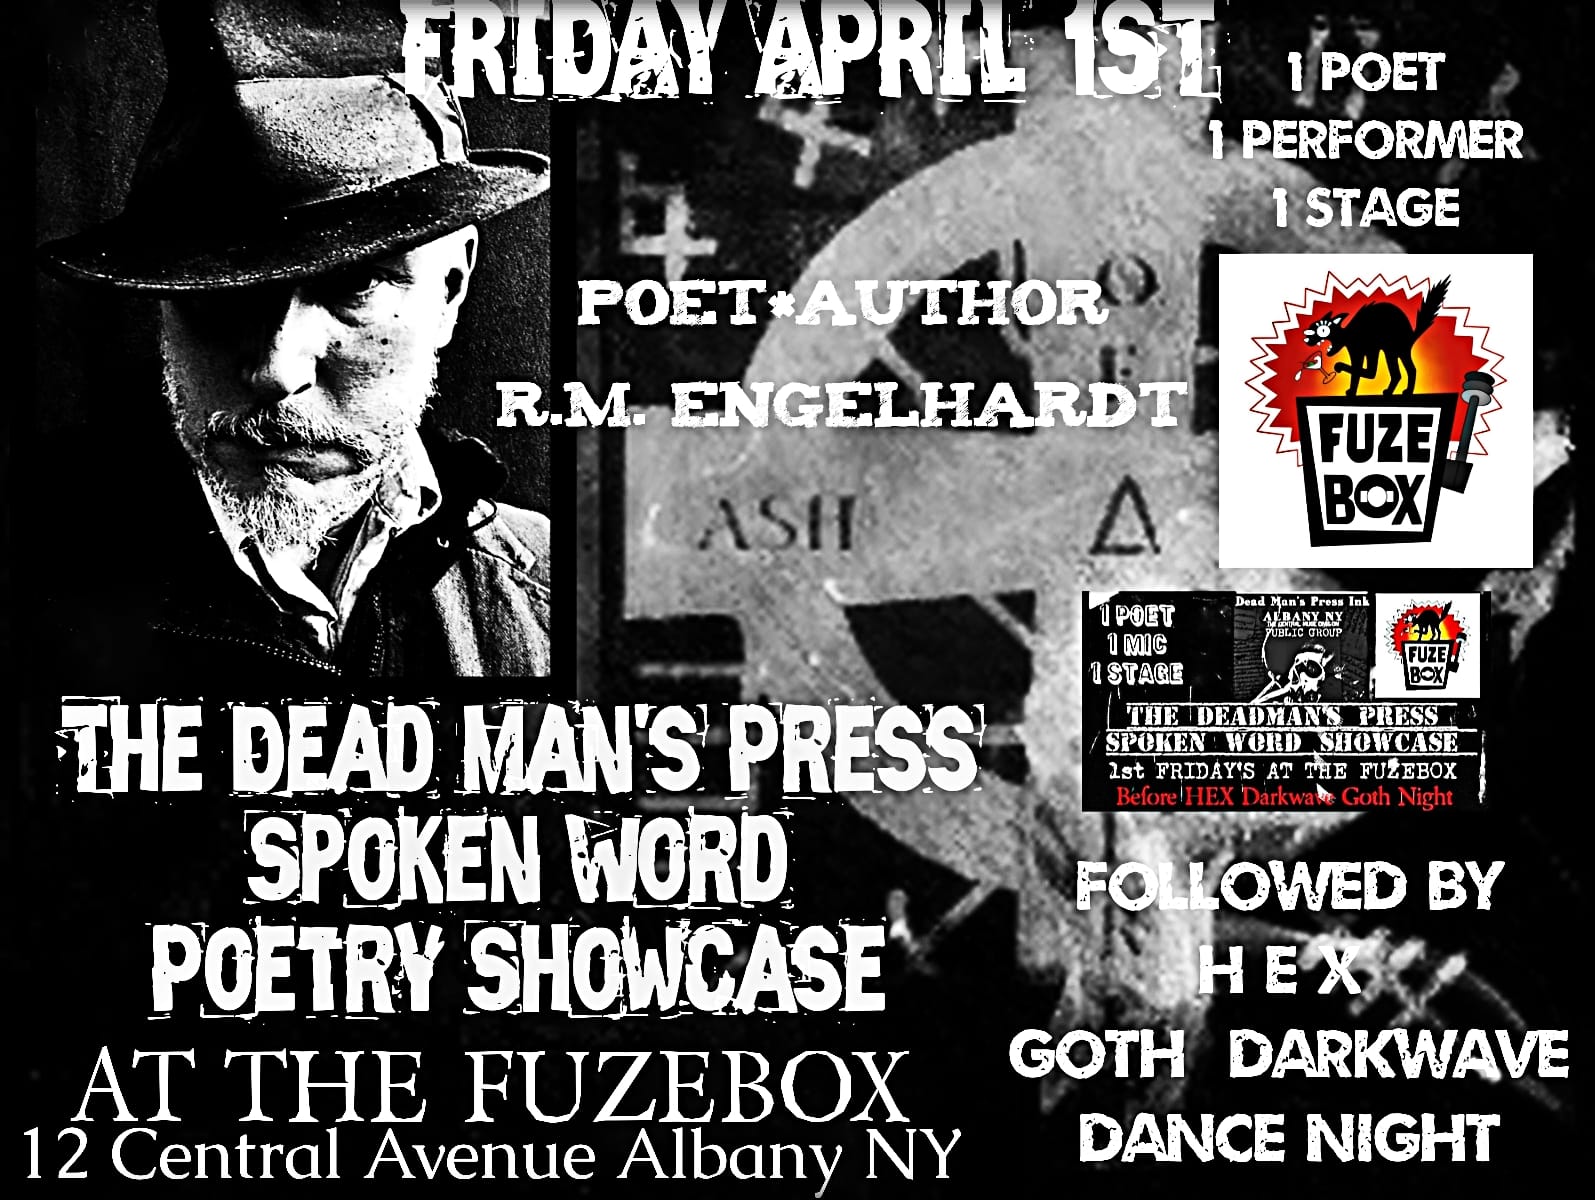 The Dead Man's Press Ink Spoken Word Poetry Showcase returns on Friday, April 1st at The FuzeBox with featured poet R.M. Engelhardt